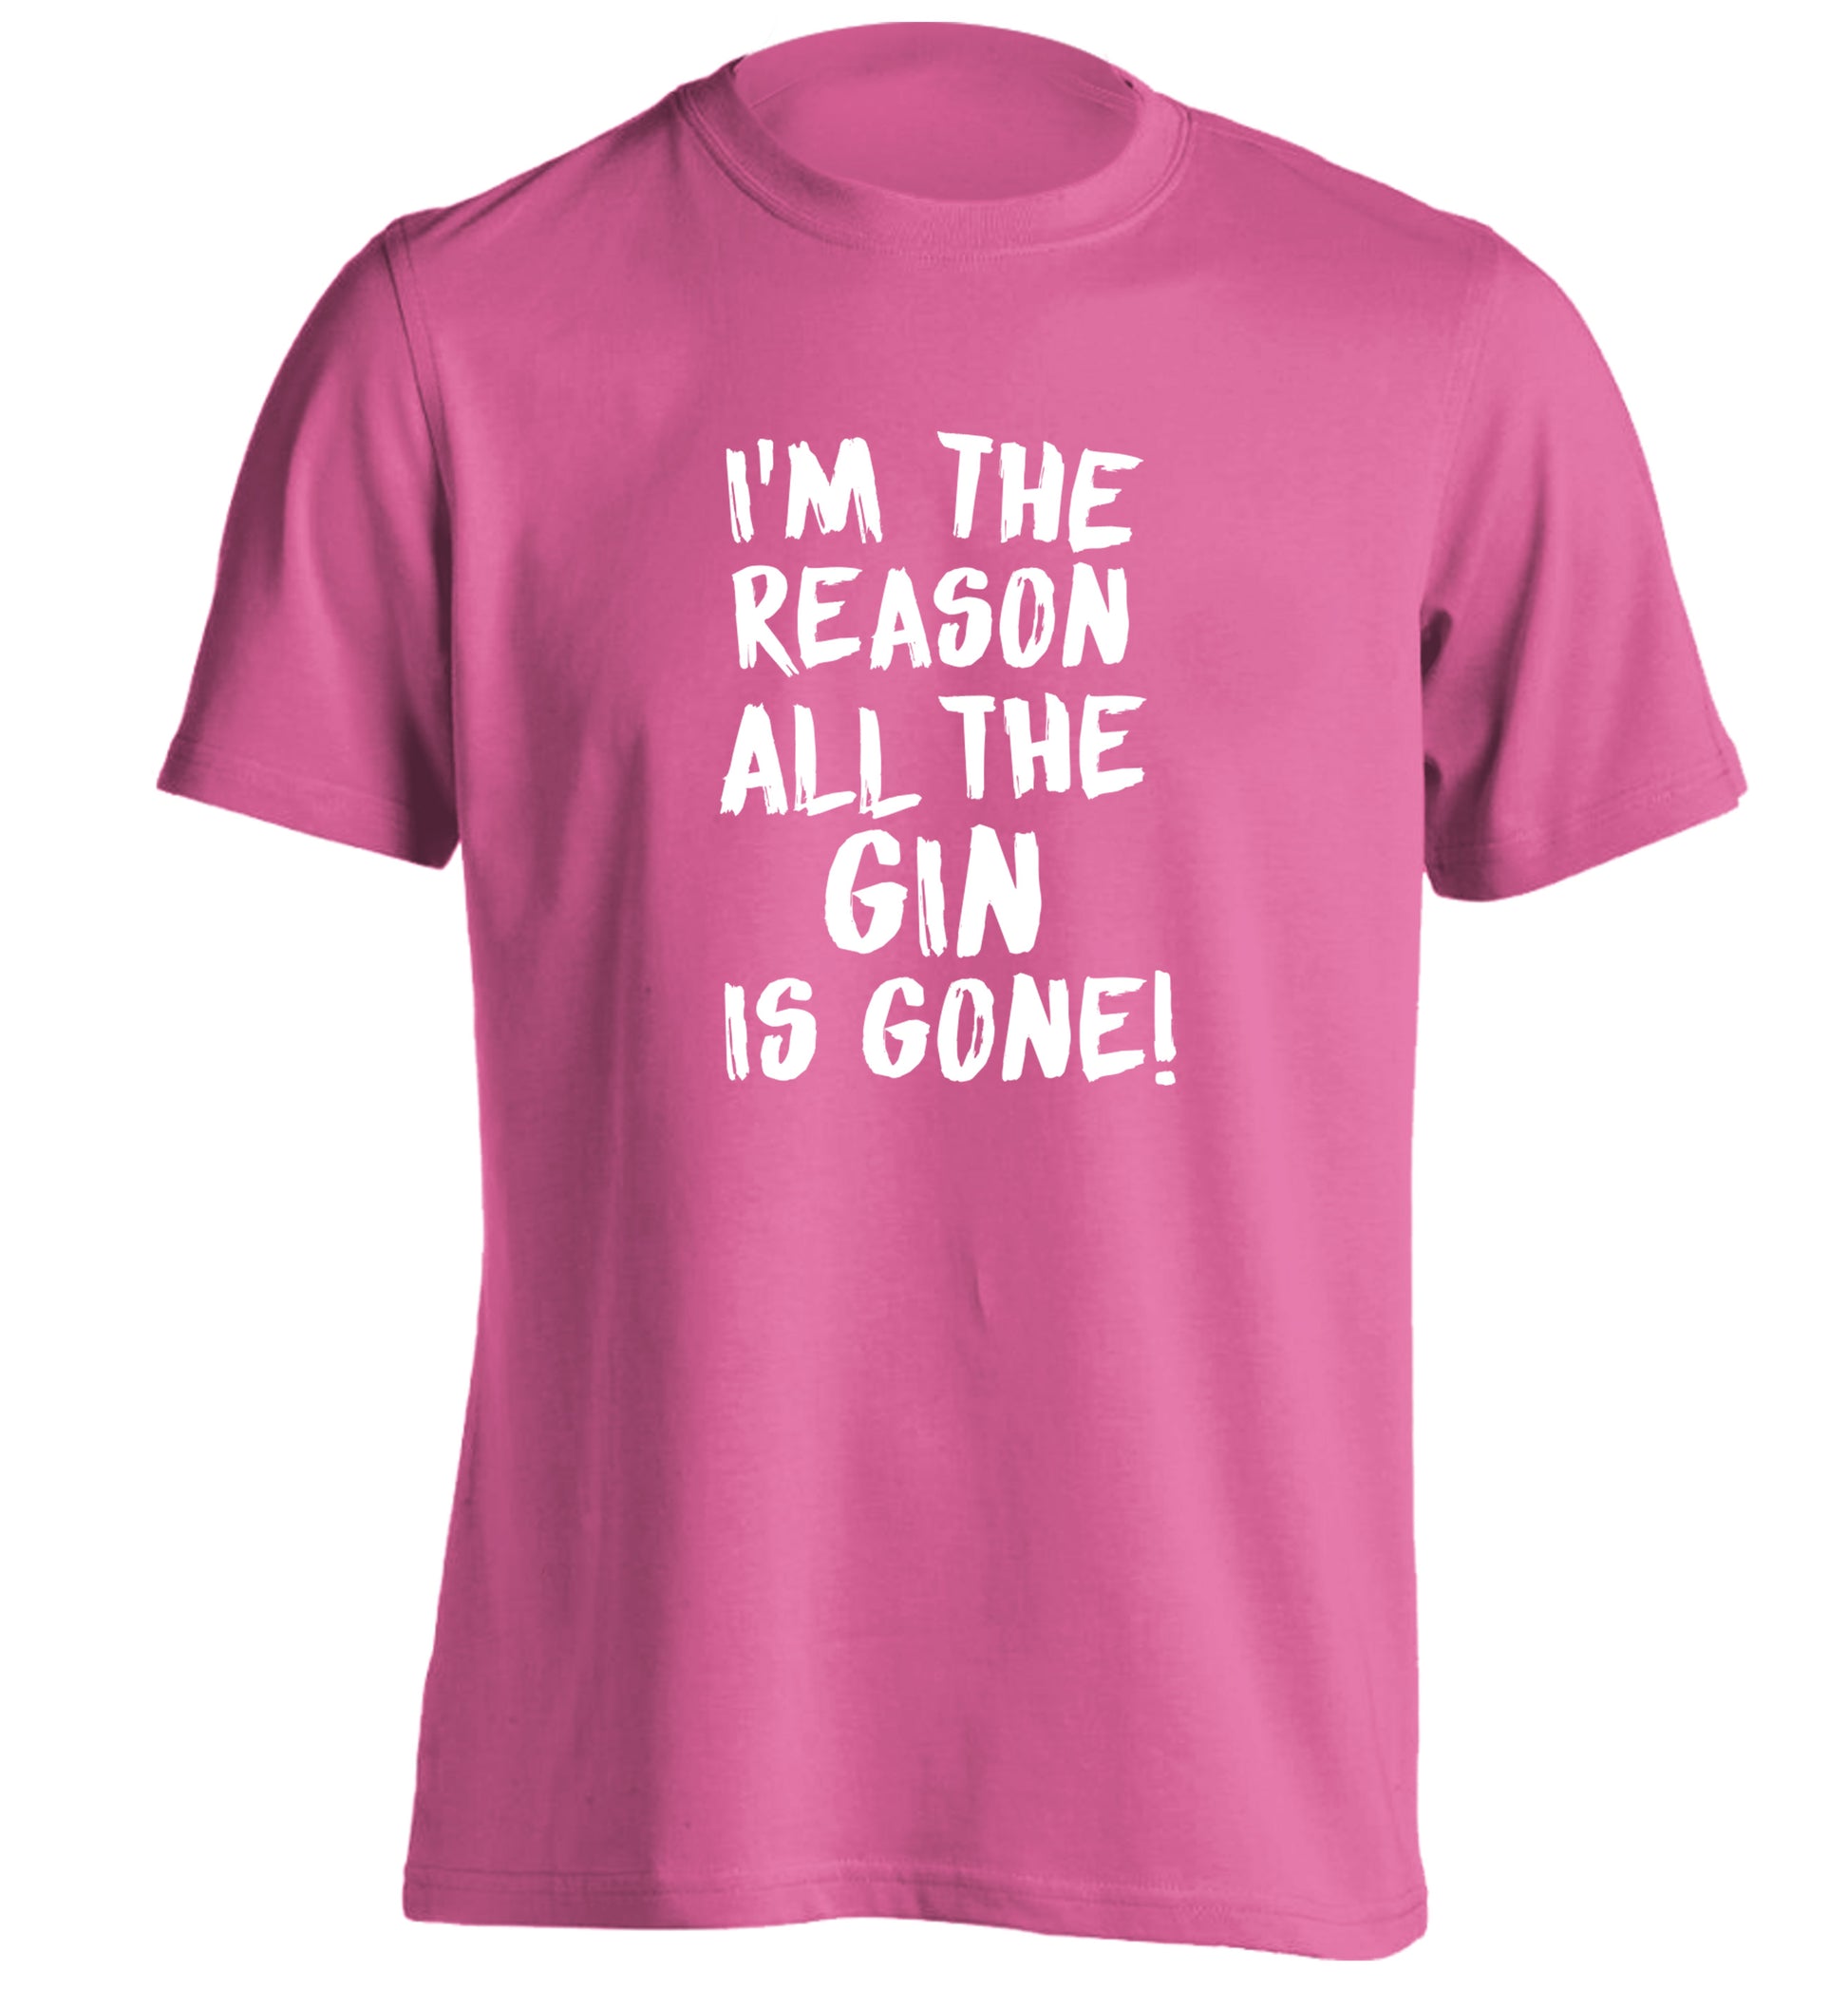 I'm the reason all the gin is gone adults unisex pink Tshirt 2XL